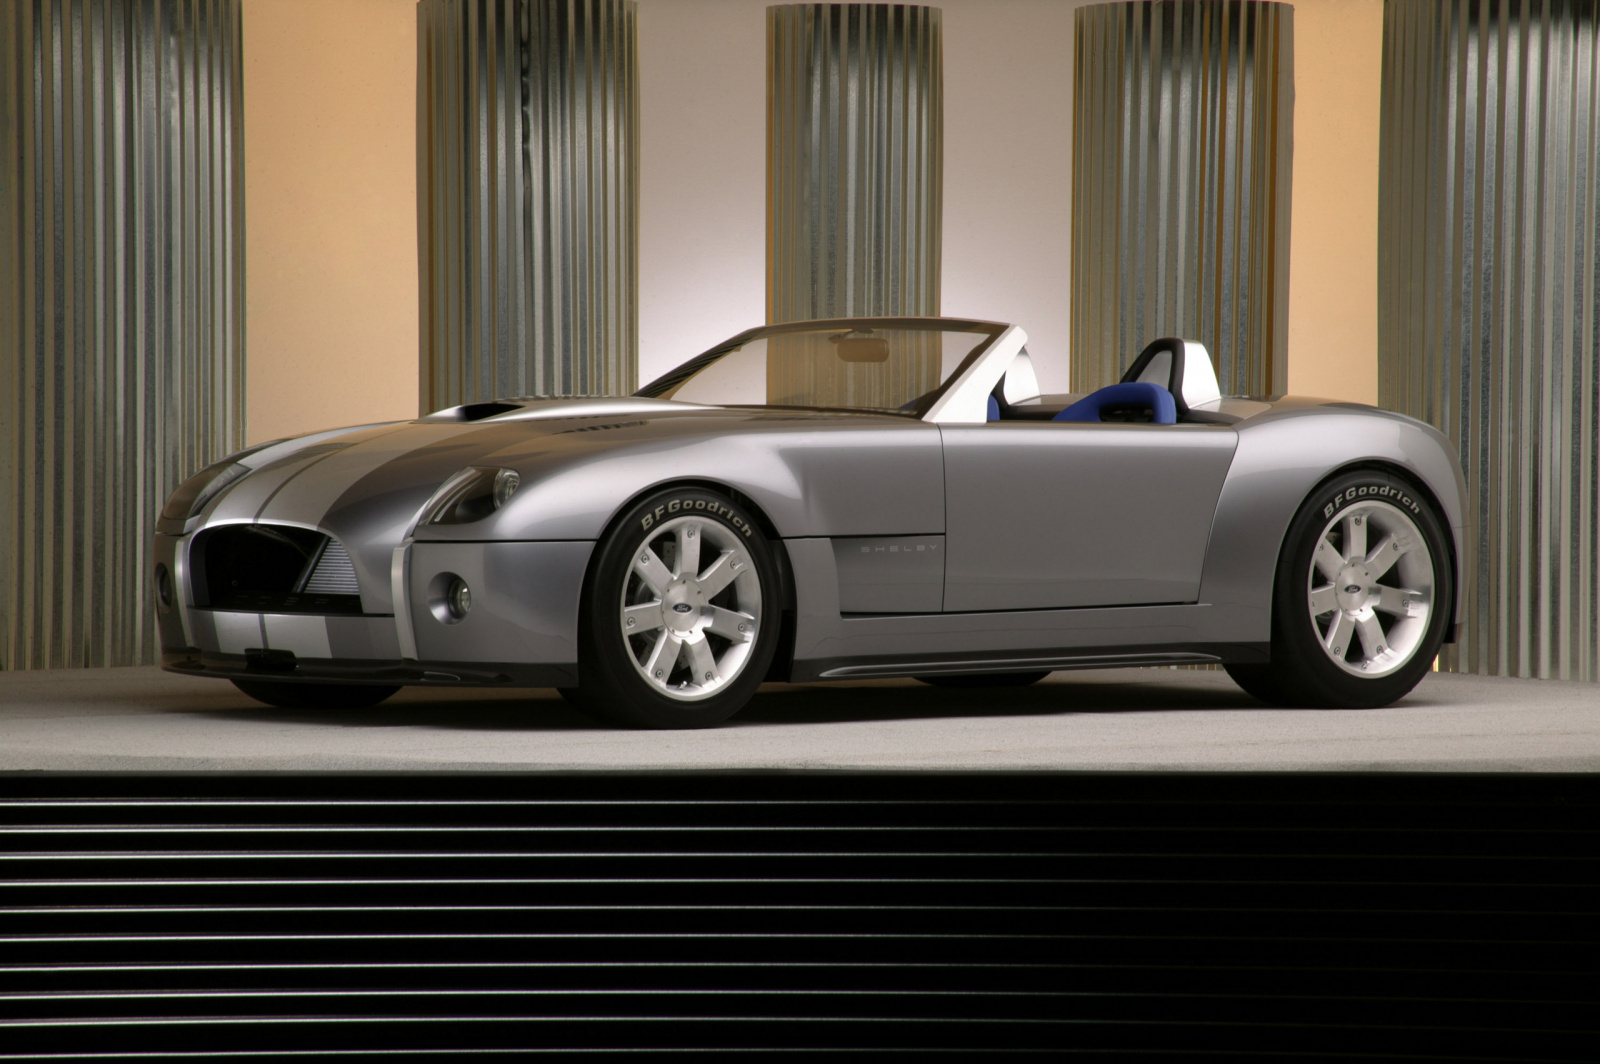 Ford Shelby Cobra Concept - Foto eines Ford Concept-Cars